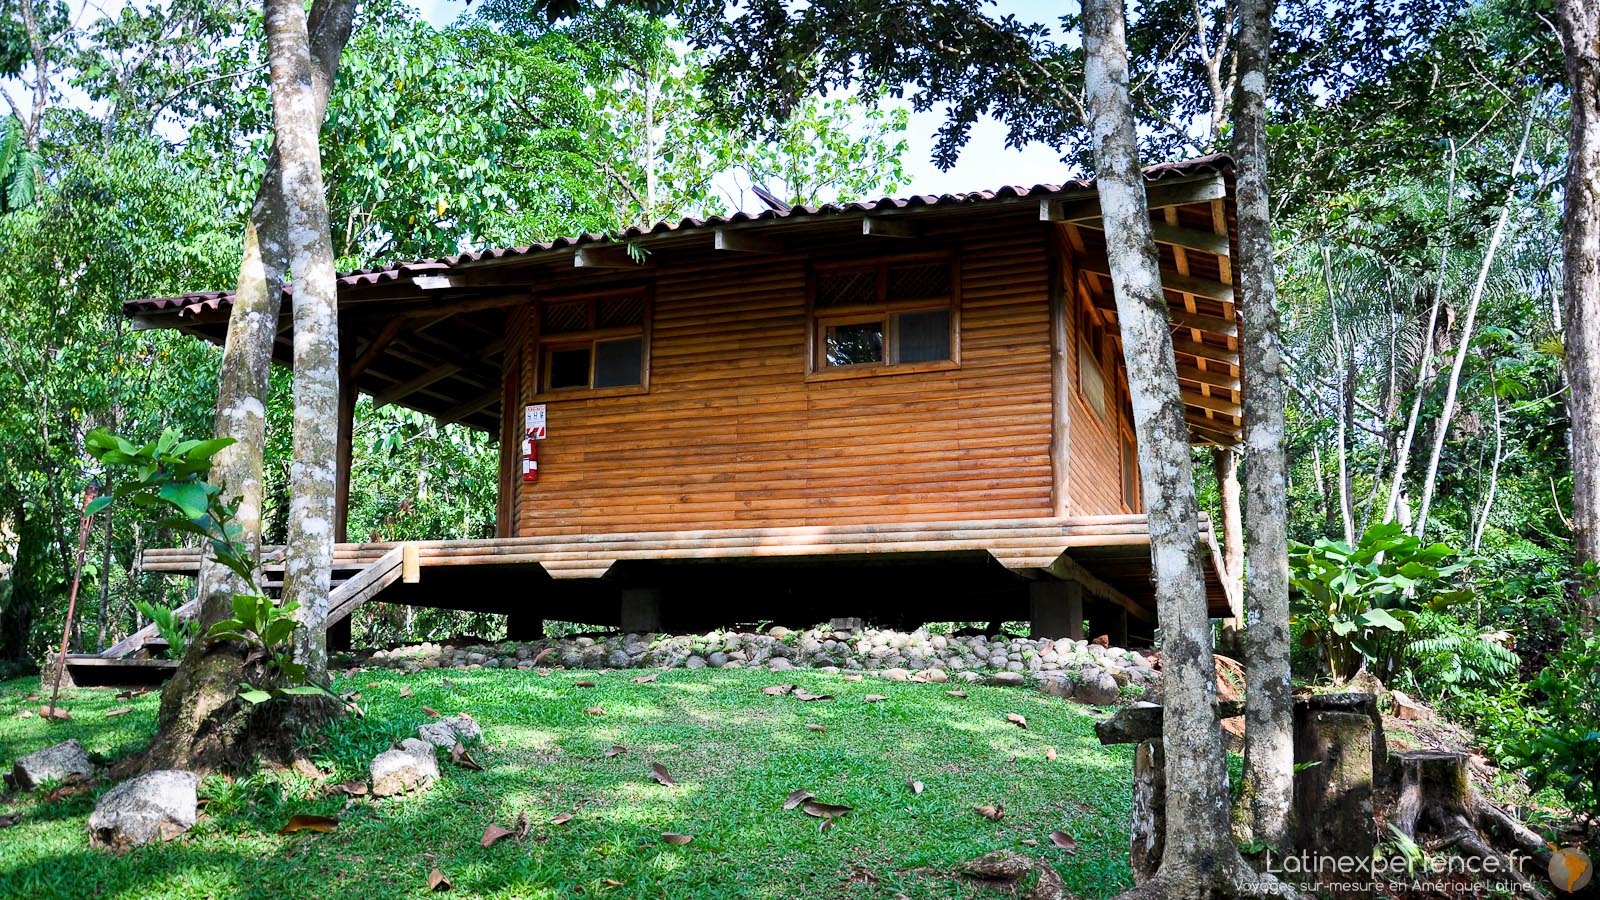 Costa Rica - Macaw Lodge écotourisme - Latinexperience voyages